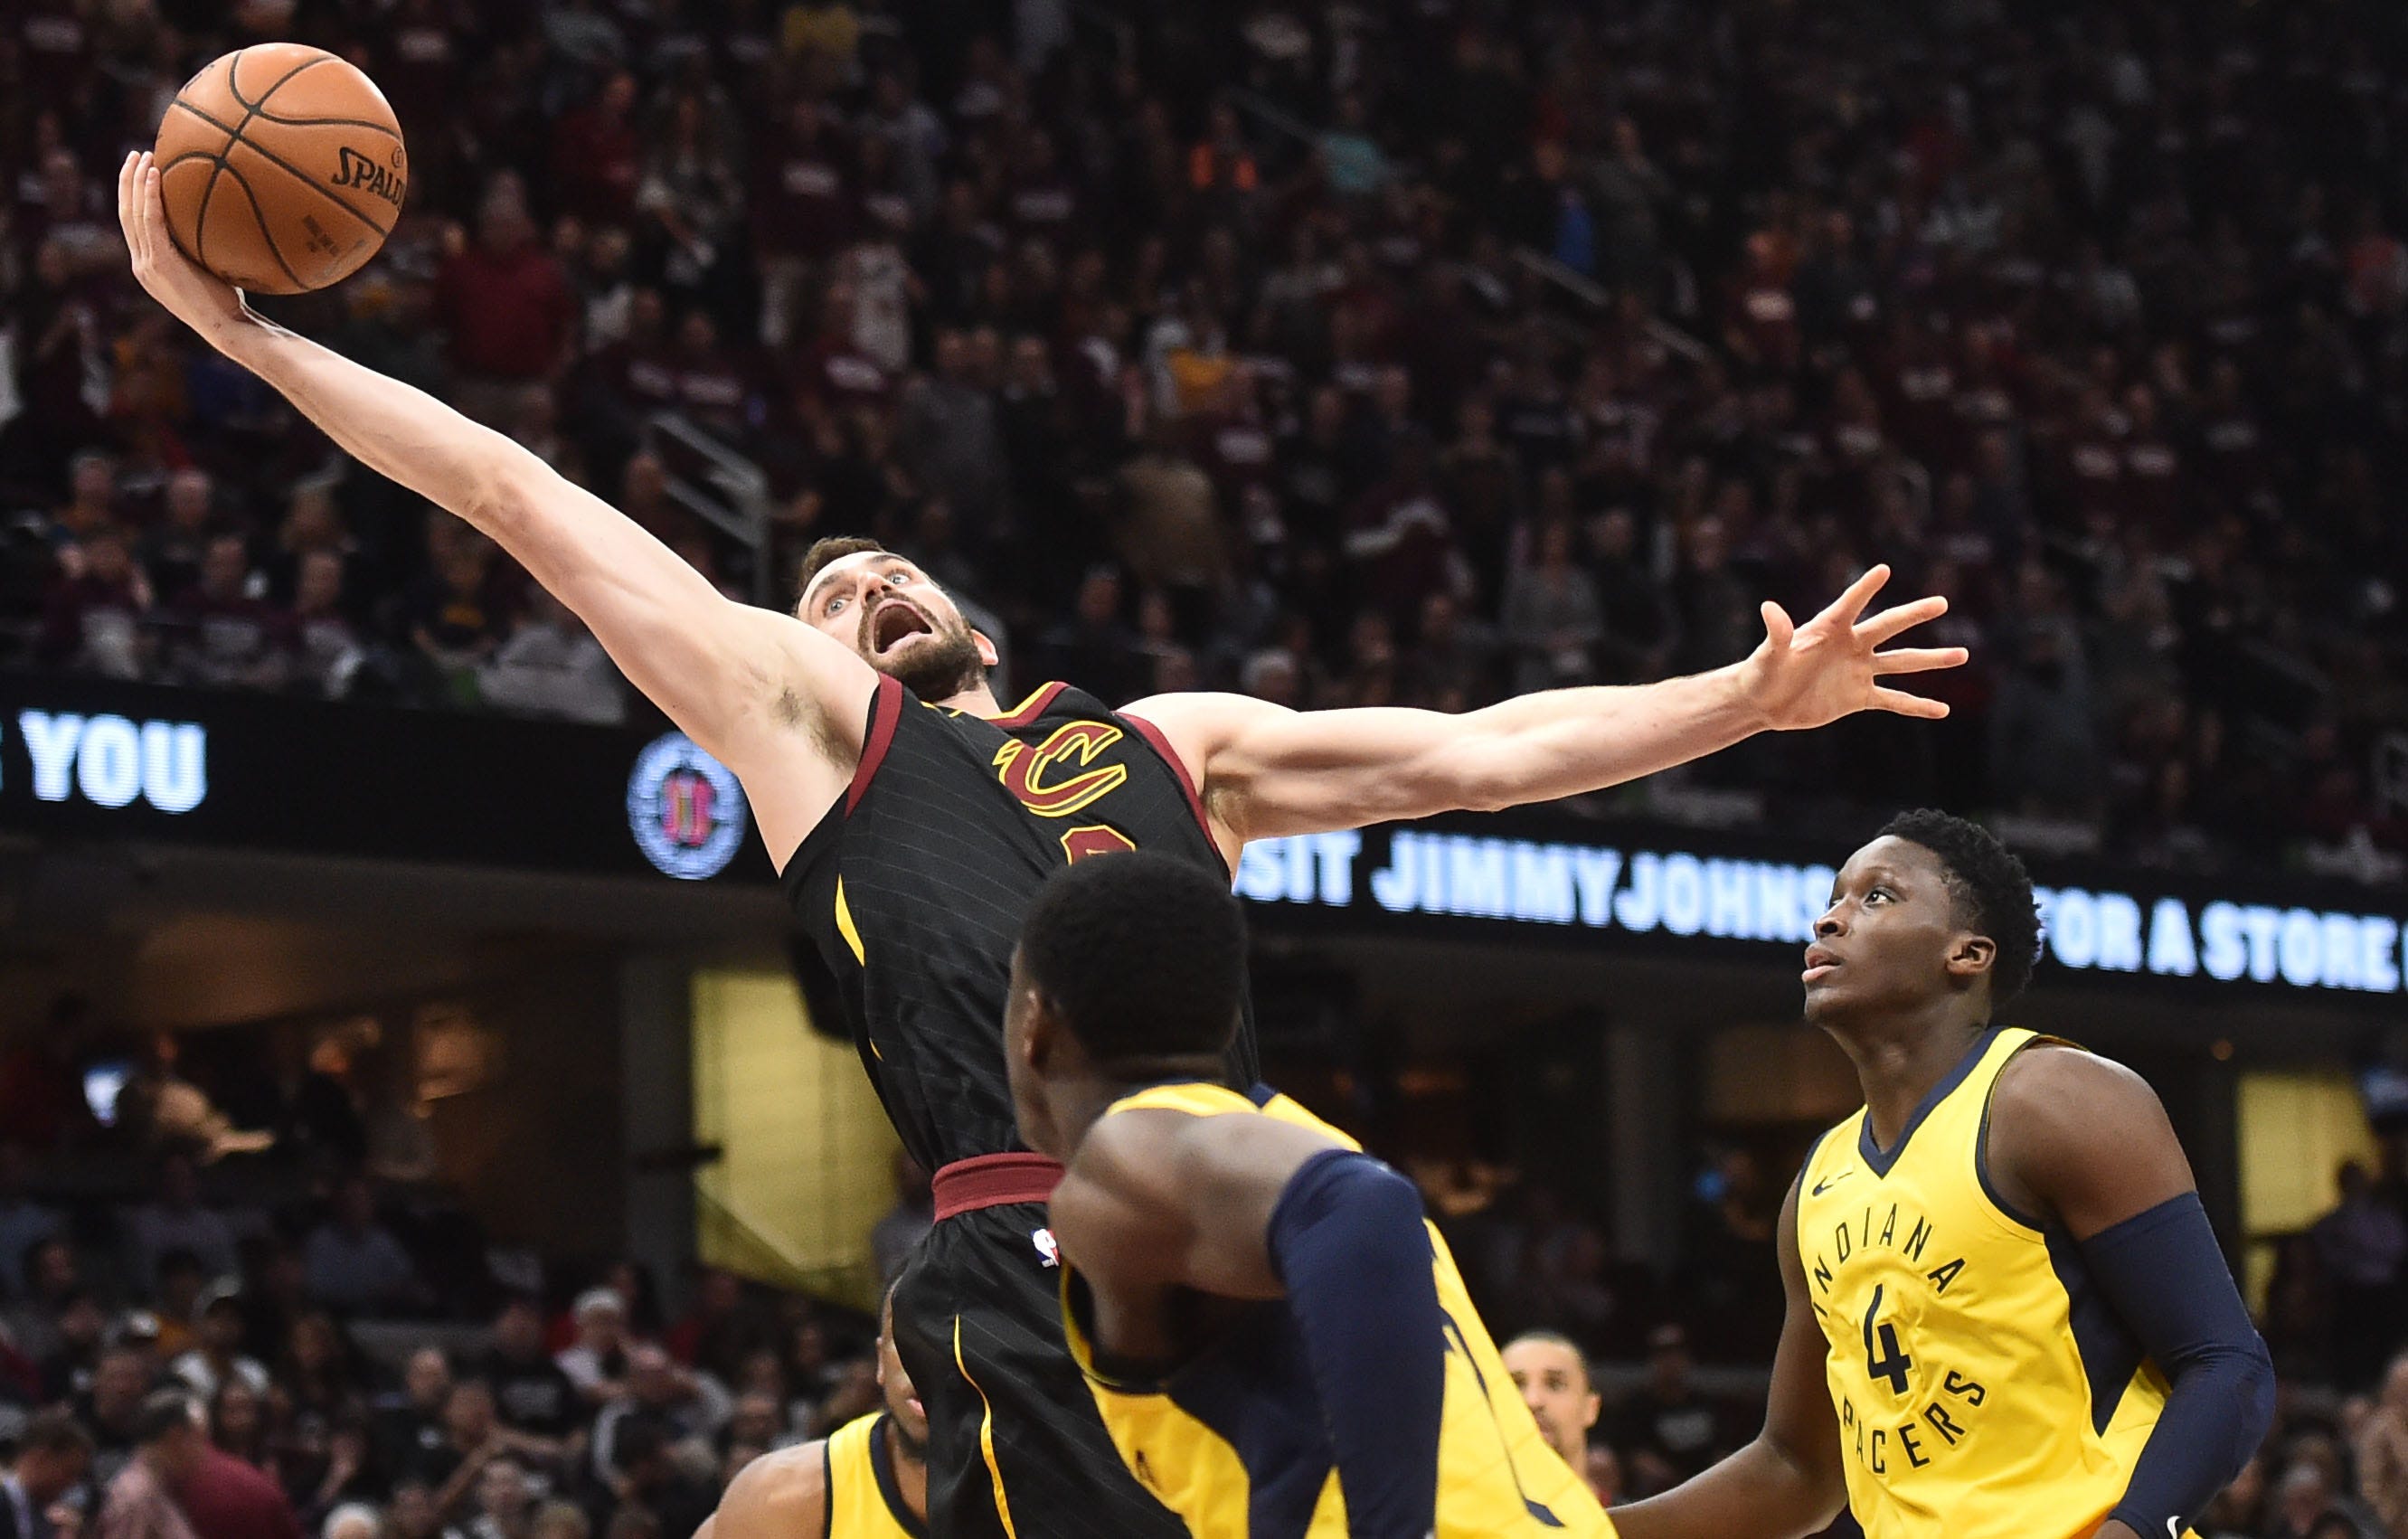 Cleveland Cavaliers center Kevin Love grabs a loose ball against the Indiana Pacers during the second half in game two of the first round of the 2018 NBA Playoffs at Quicken Loans Arena in Cleveland.